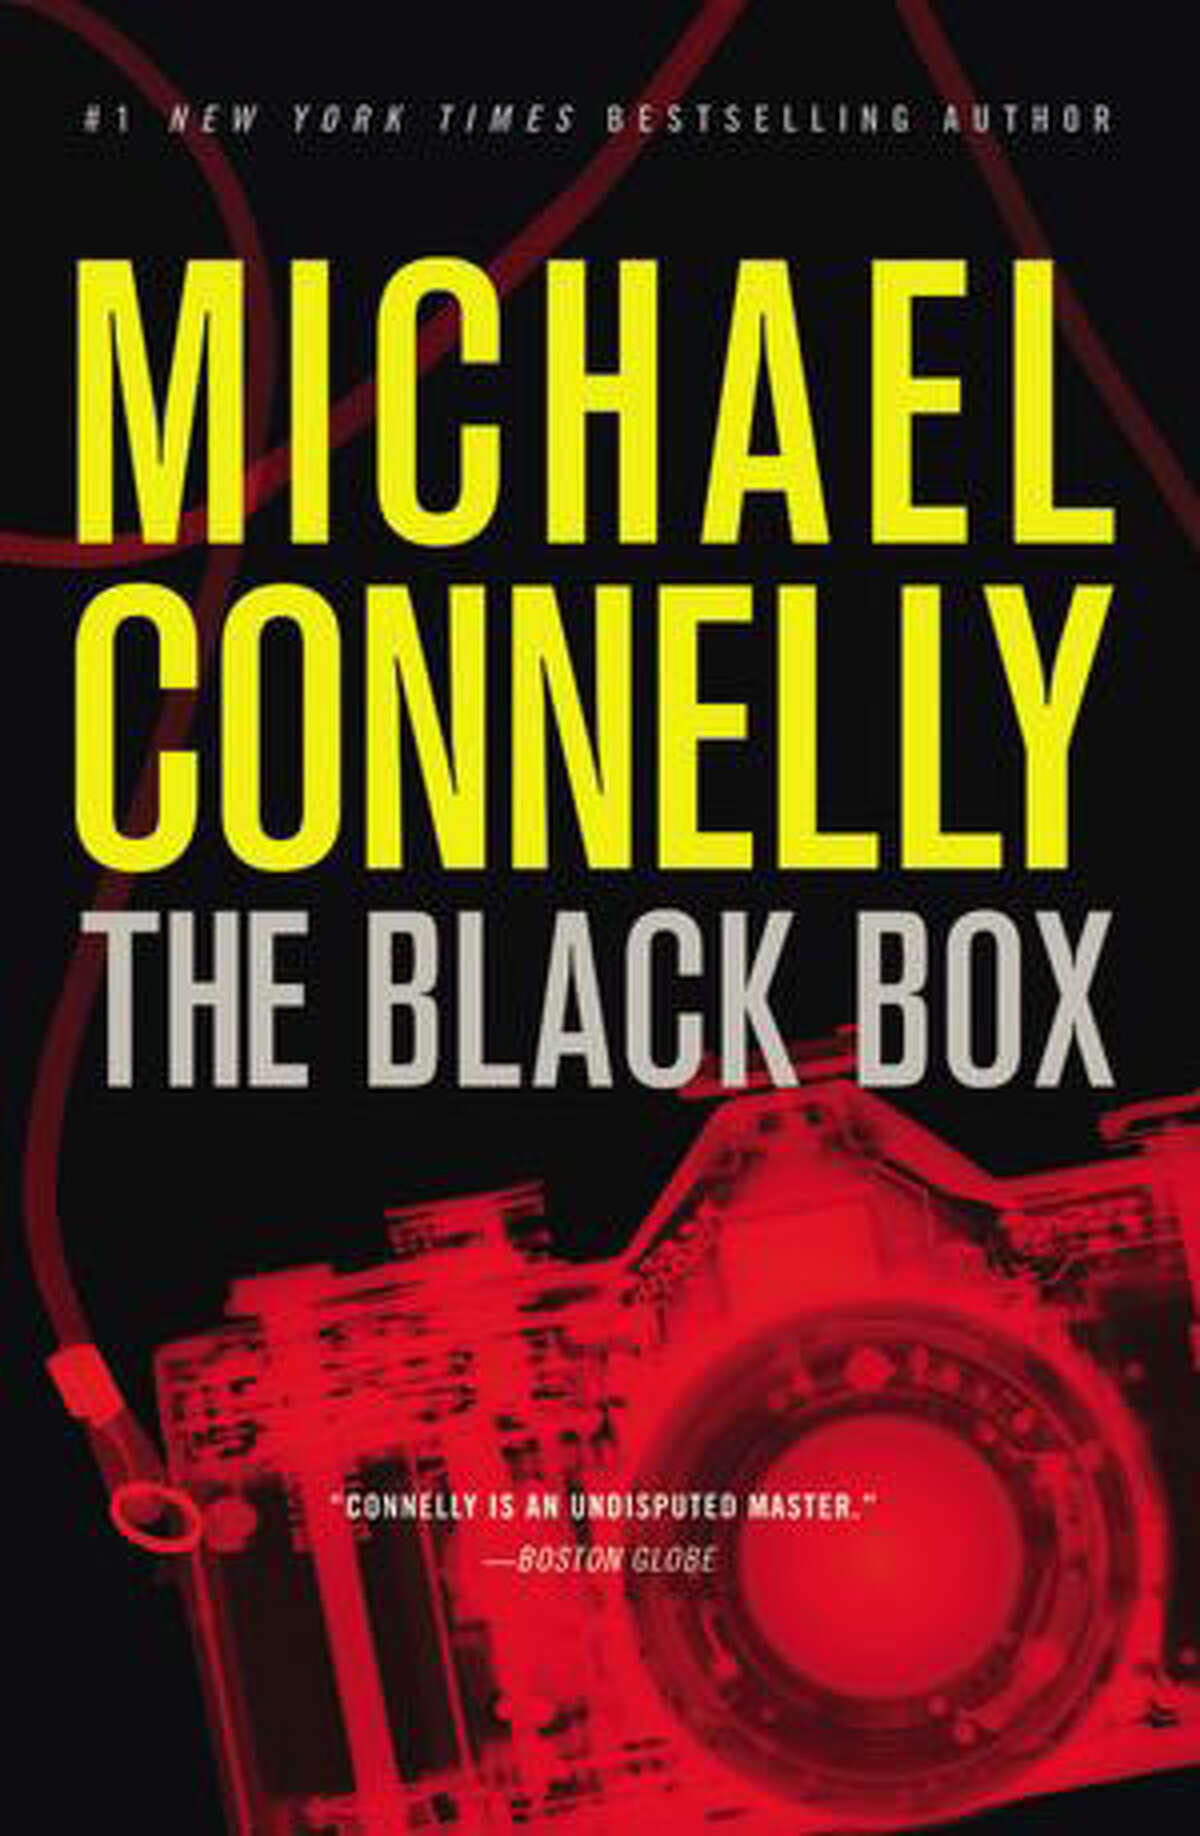 We rarely have the chance to go back and try to right something we failed at 20 years ago. In Michael Connelly’s latest thriller “The Black Box,” LAPD Det. Harry Bosch gets that chance by reopening a murder case from the Rodney King riots.